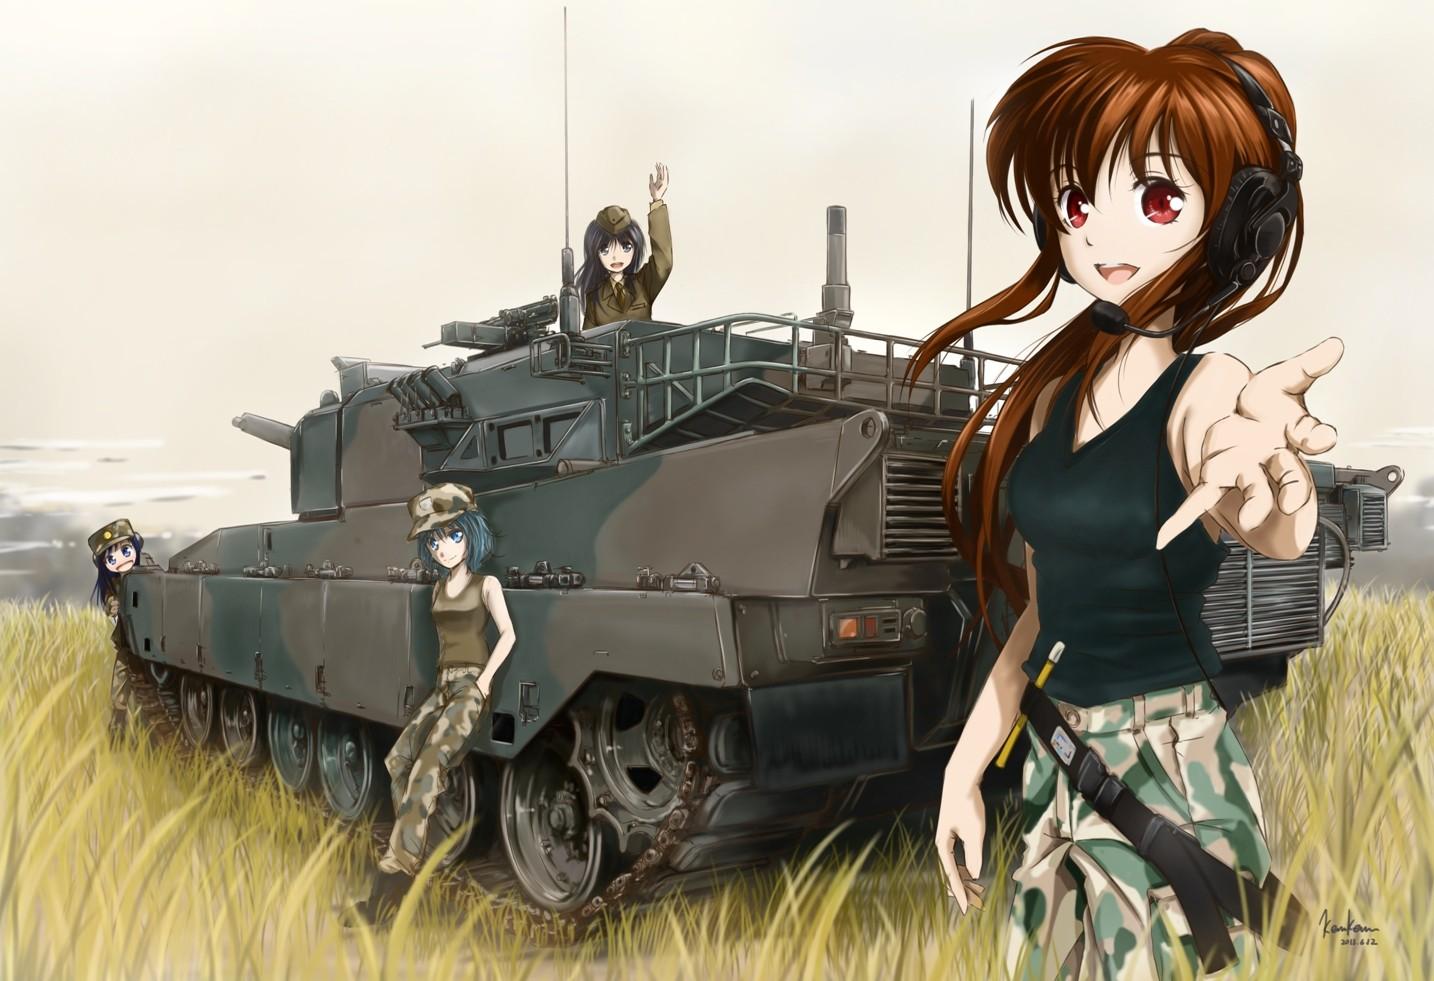 Echoes of Pandora - Quick look at new anime girls + tanks mobile game from  China - MMO Culture